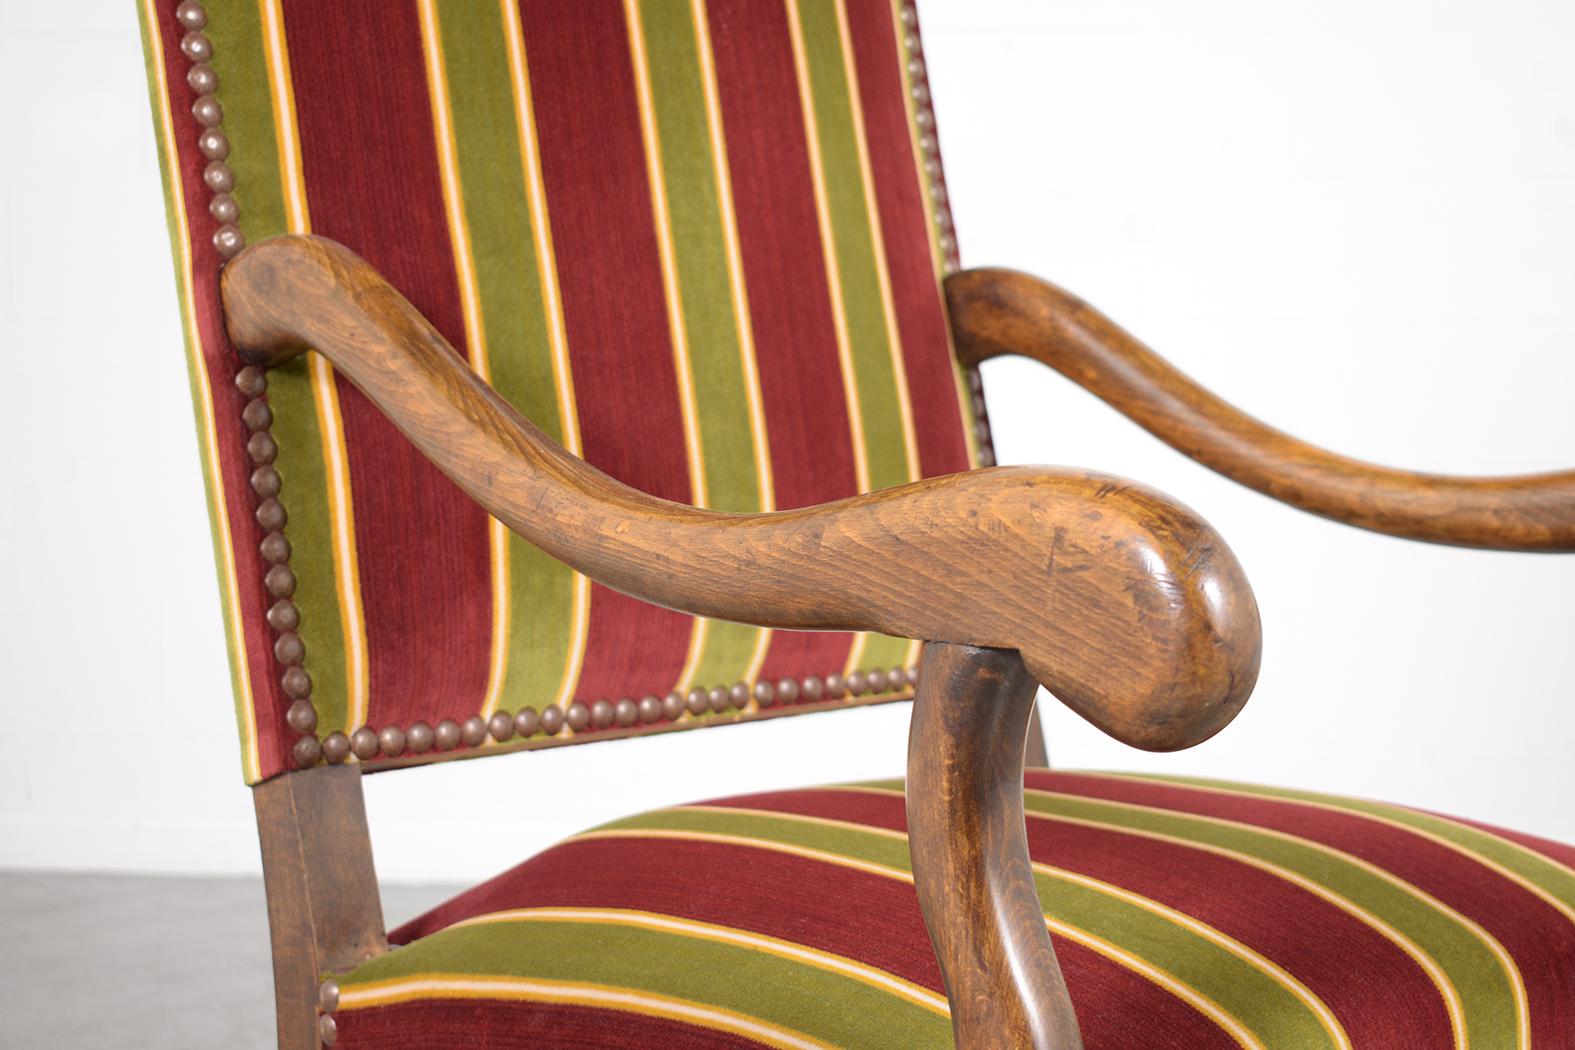 19th Century French Armchairs: Dark Walnut Finish with Striped Velvet Upholstery For Sale 6